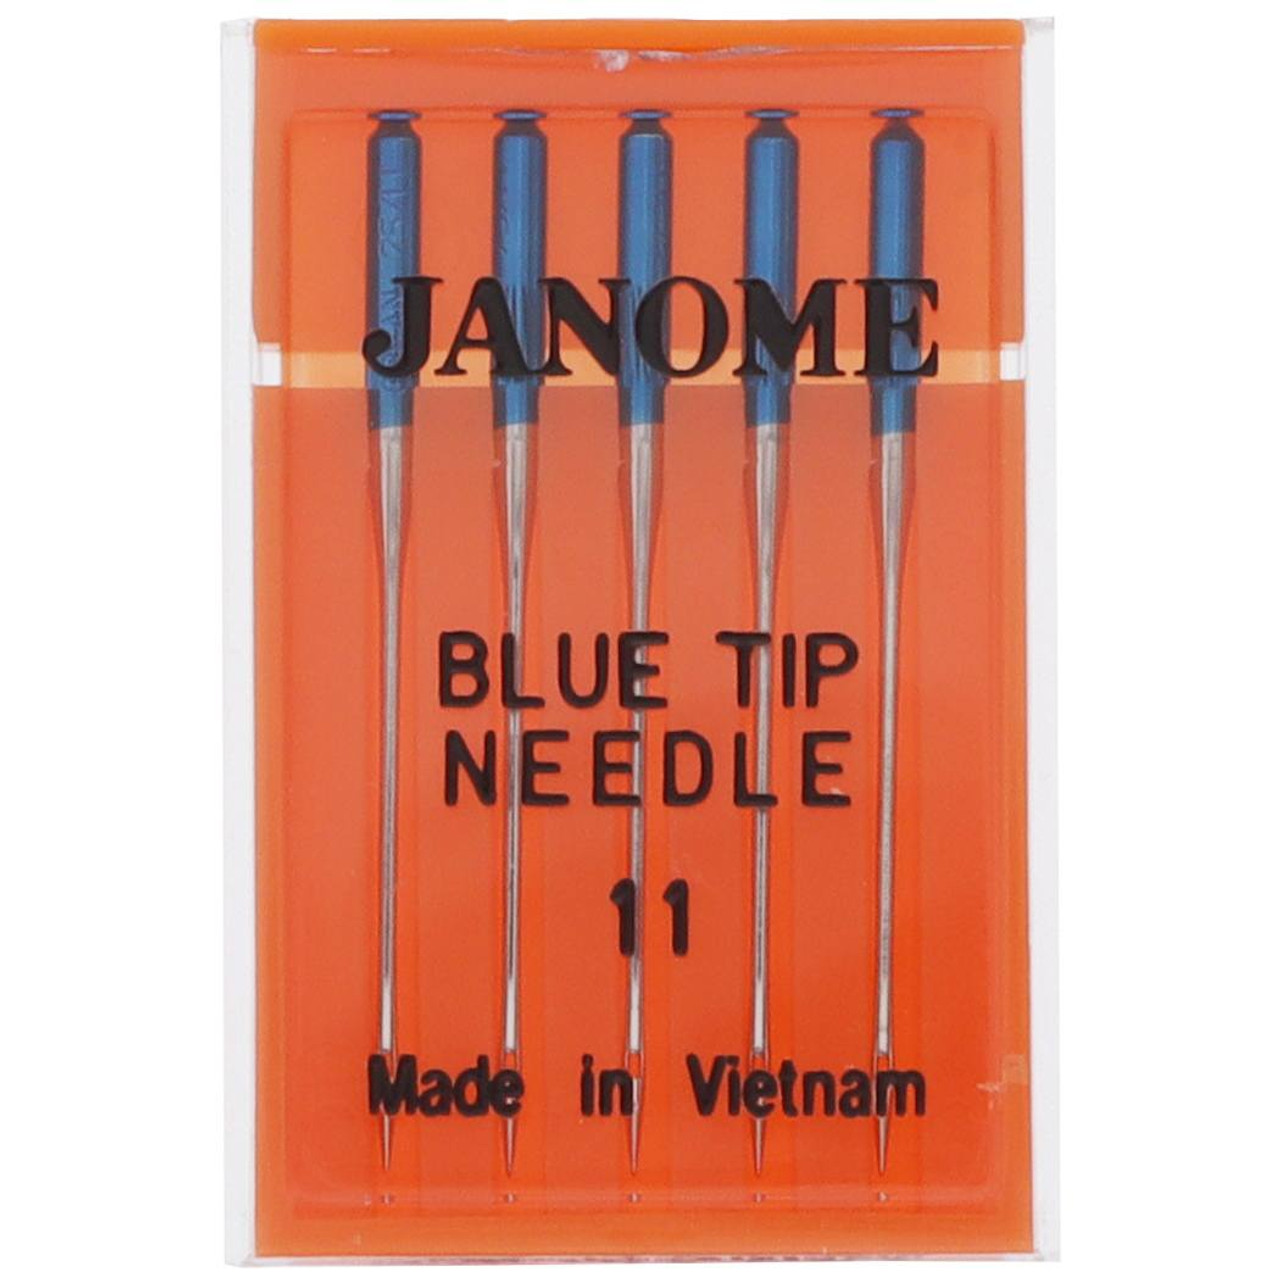 Janome All Purpose Blue Tip Needles Size 11